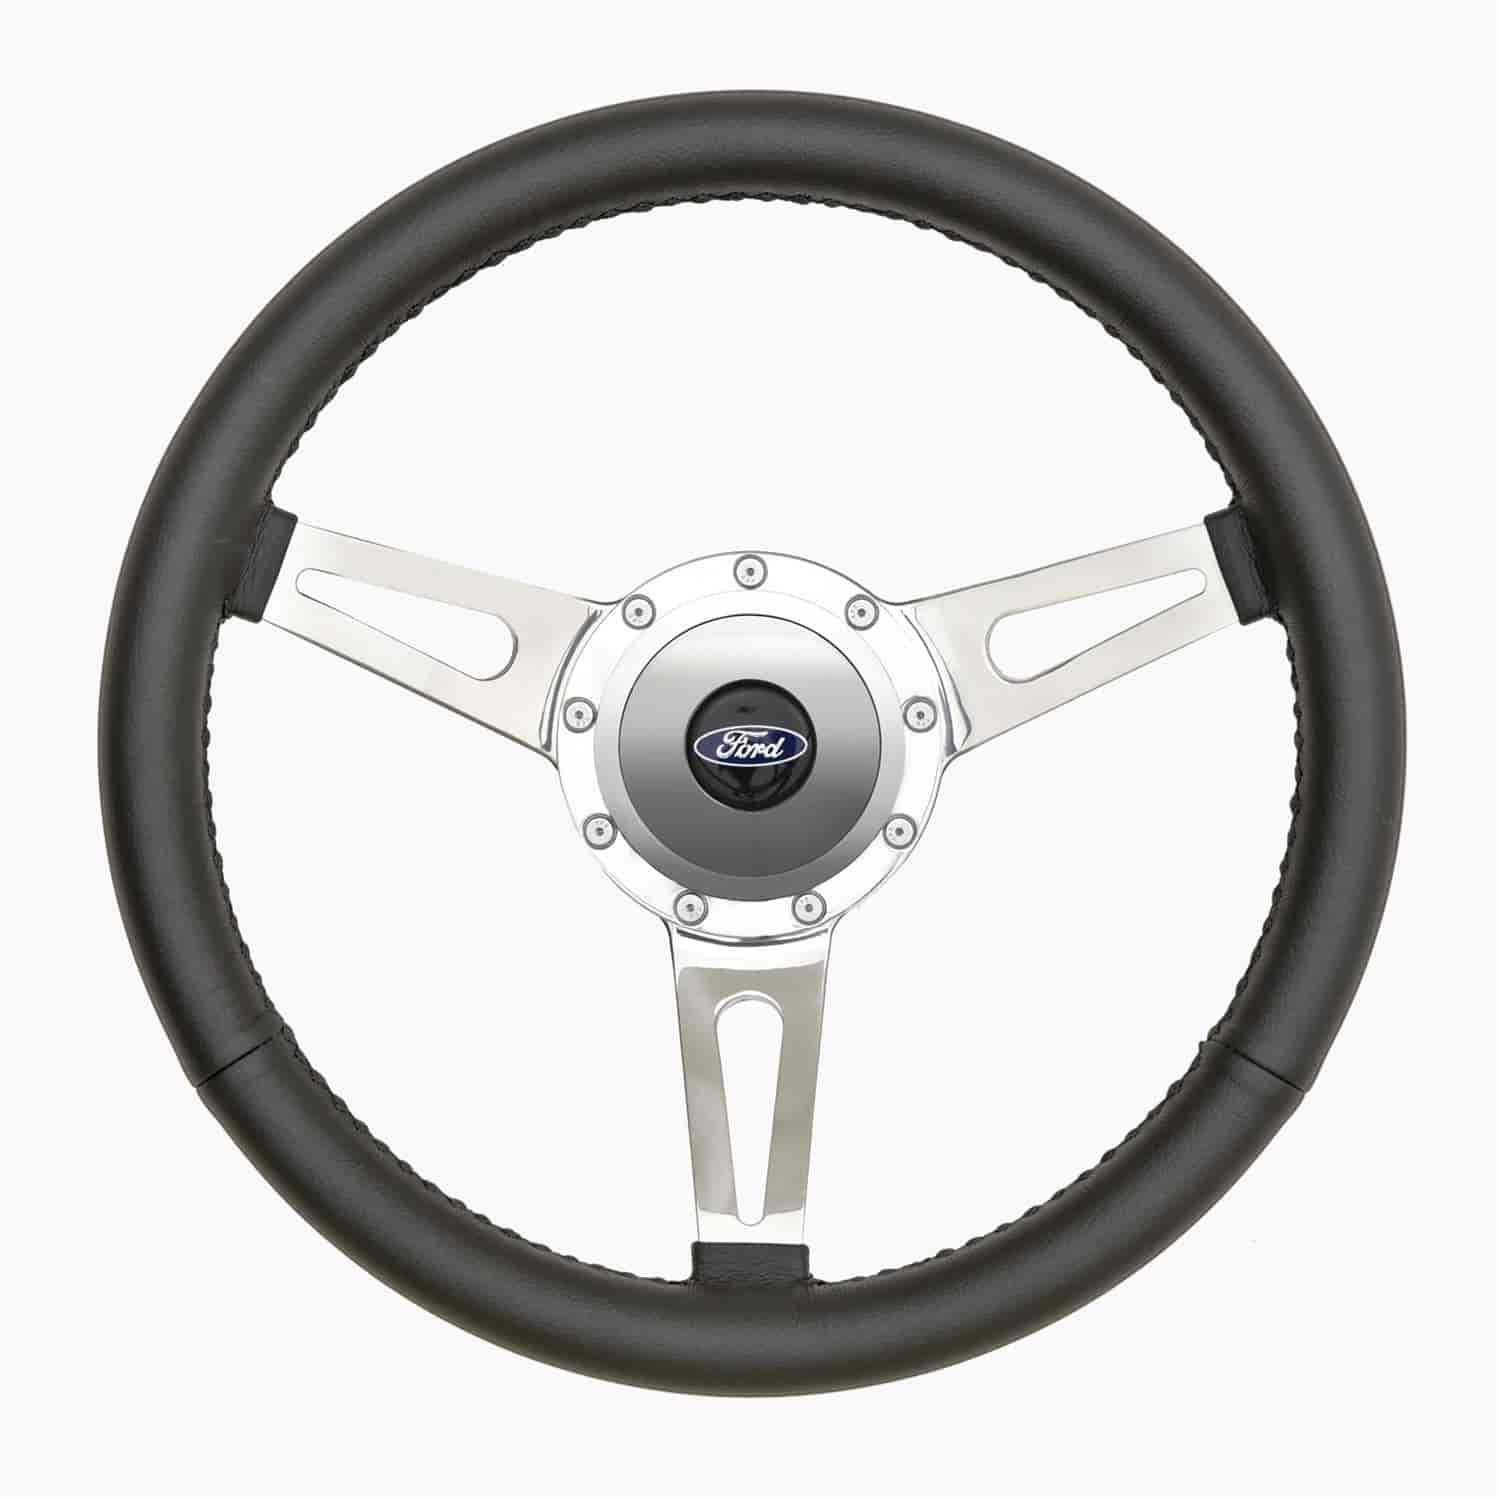 Retro style Wheel and GT style P-Touring gt wheel